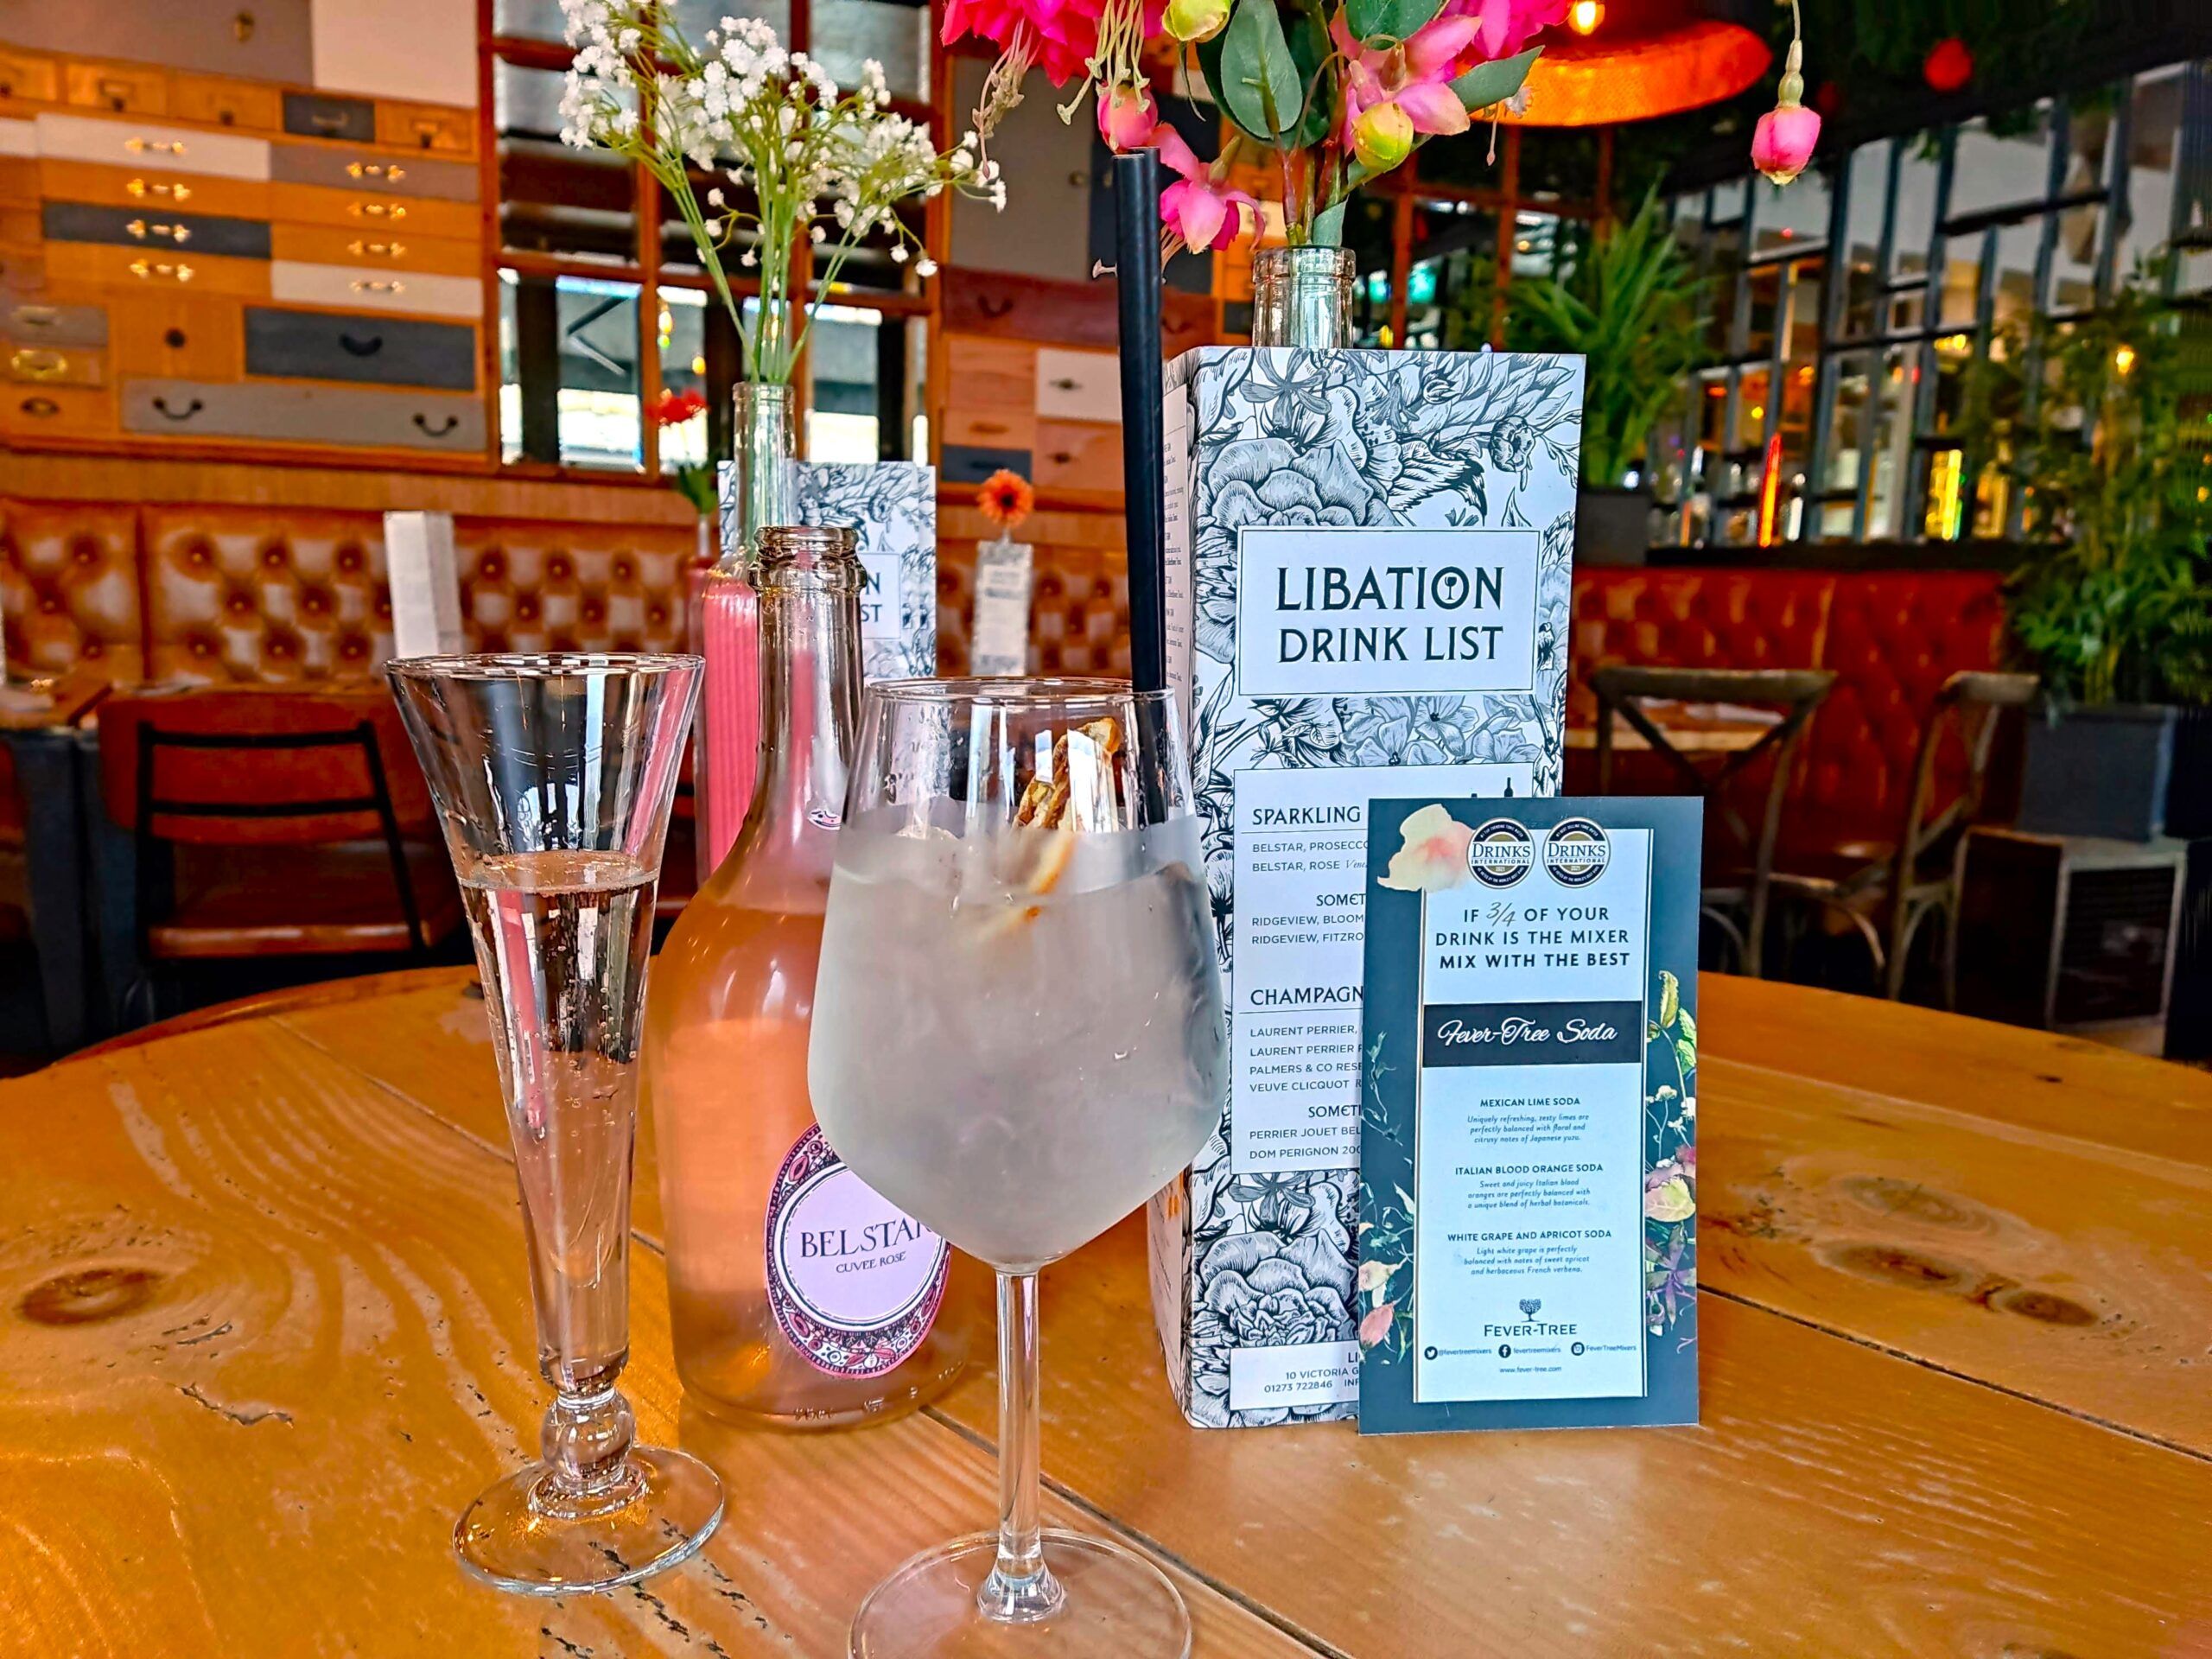 libation drink menu on the brown table together with the bottle of delicately pink Belstar, and two glasses 